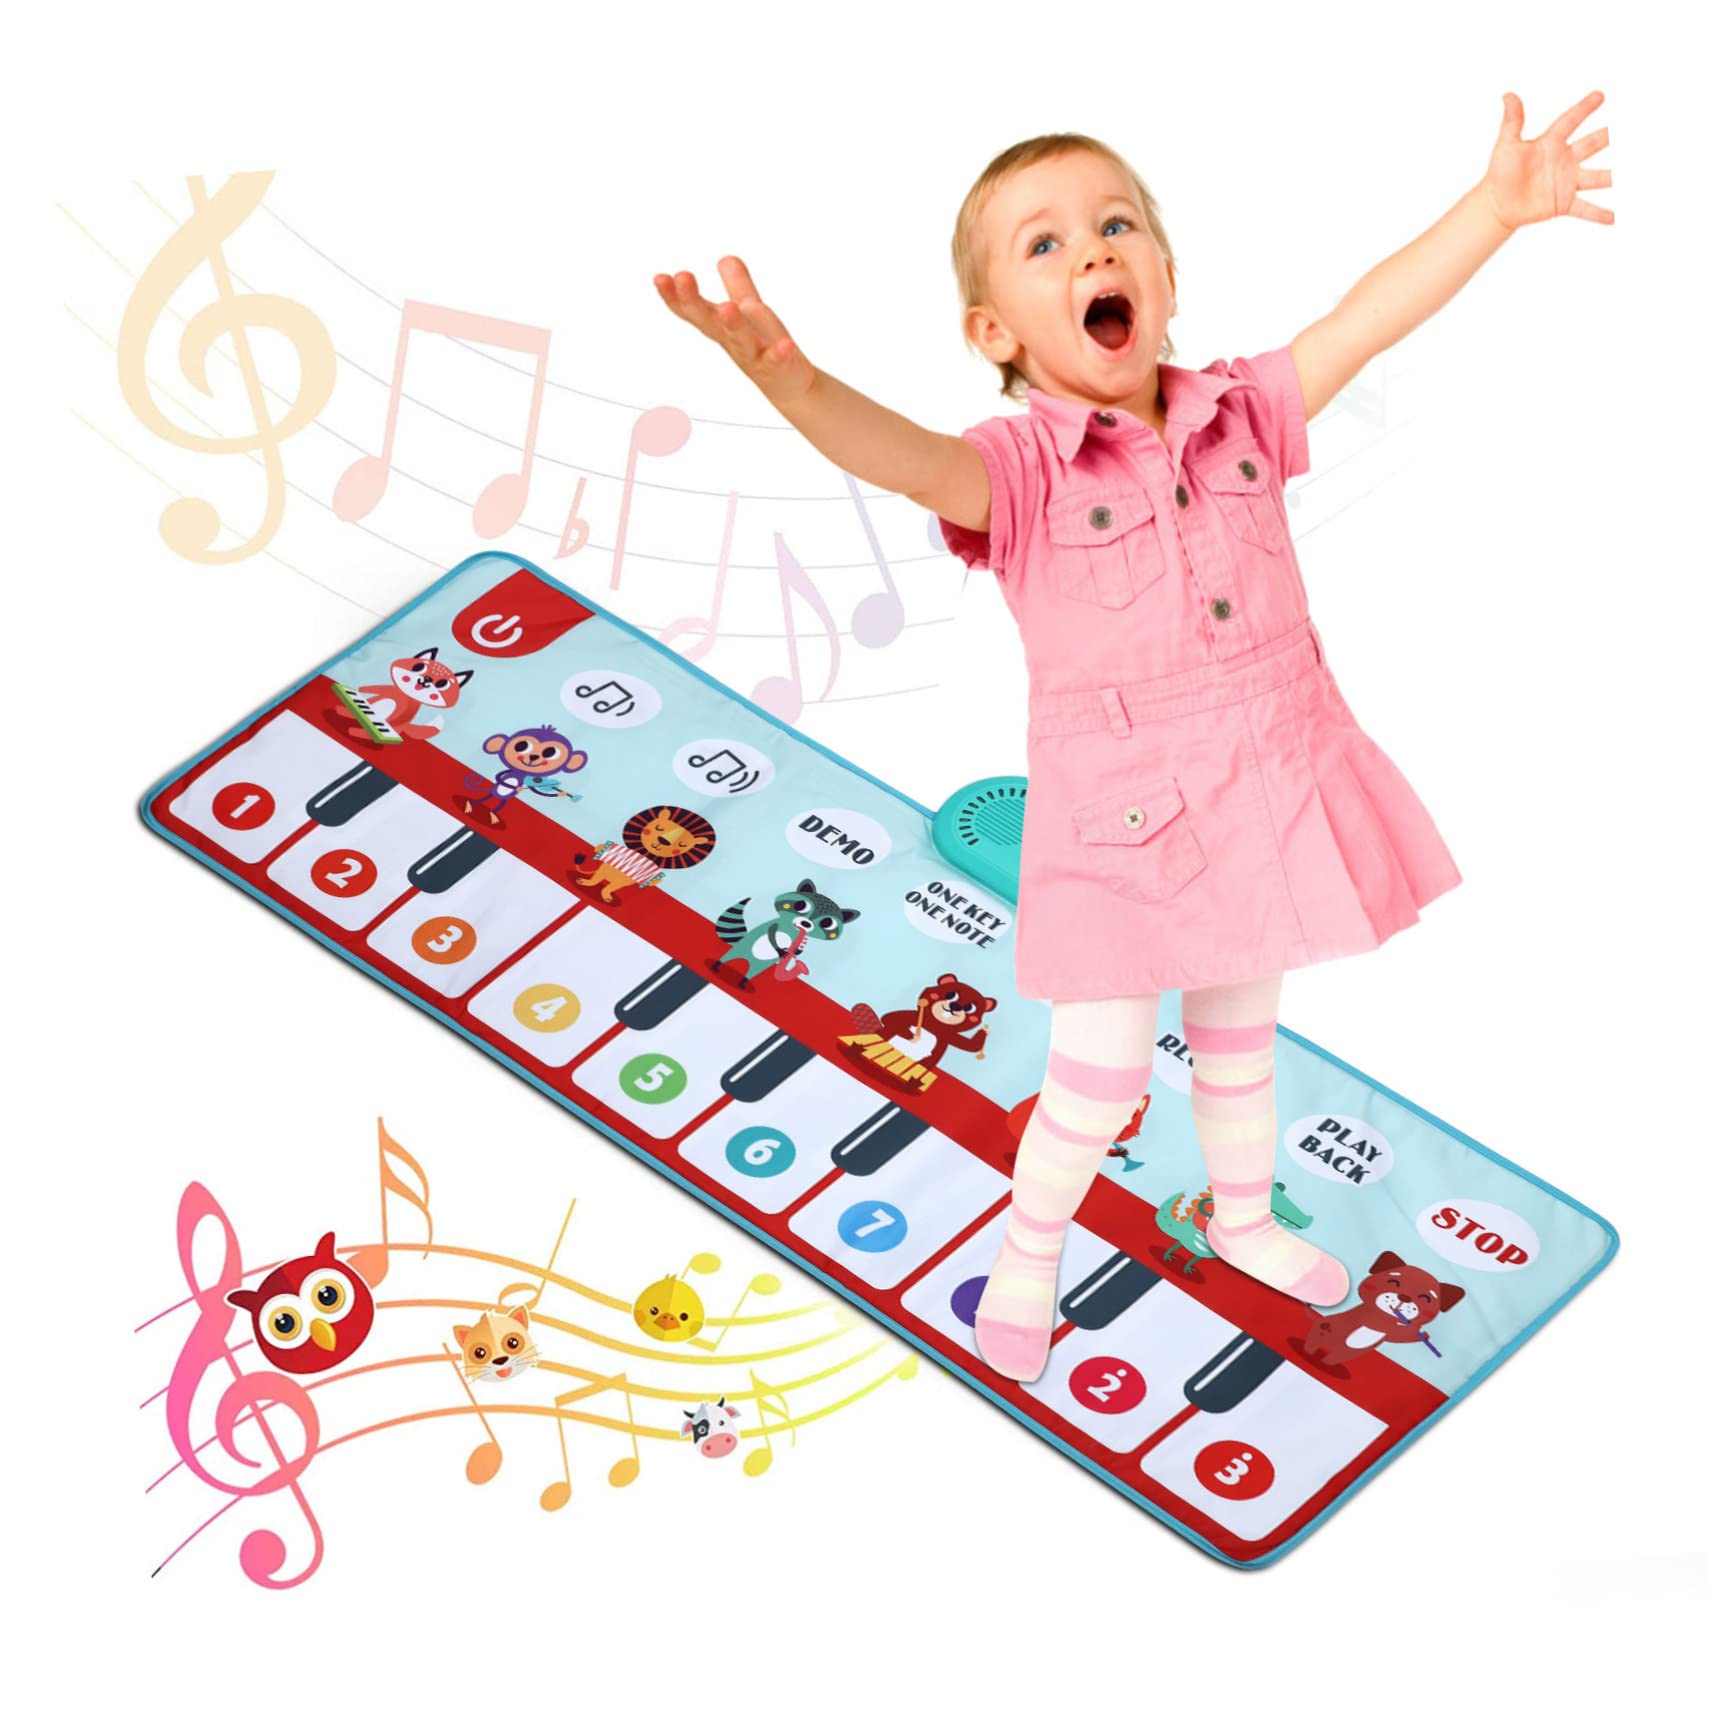 ERINGOGO 3pcs Piano Rug Piano Mat for Baby Musical Blanket Musical Mat for Toddlers Musical Toys for Toddlers Musical Piano Mat Preschool Electronic Component Animal Crawling Blanket